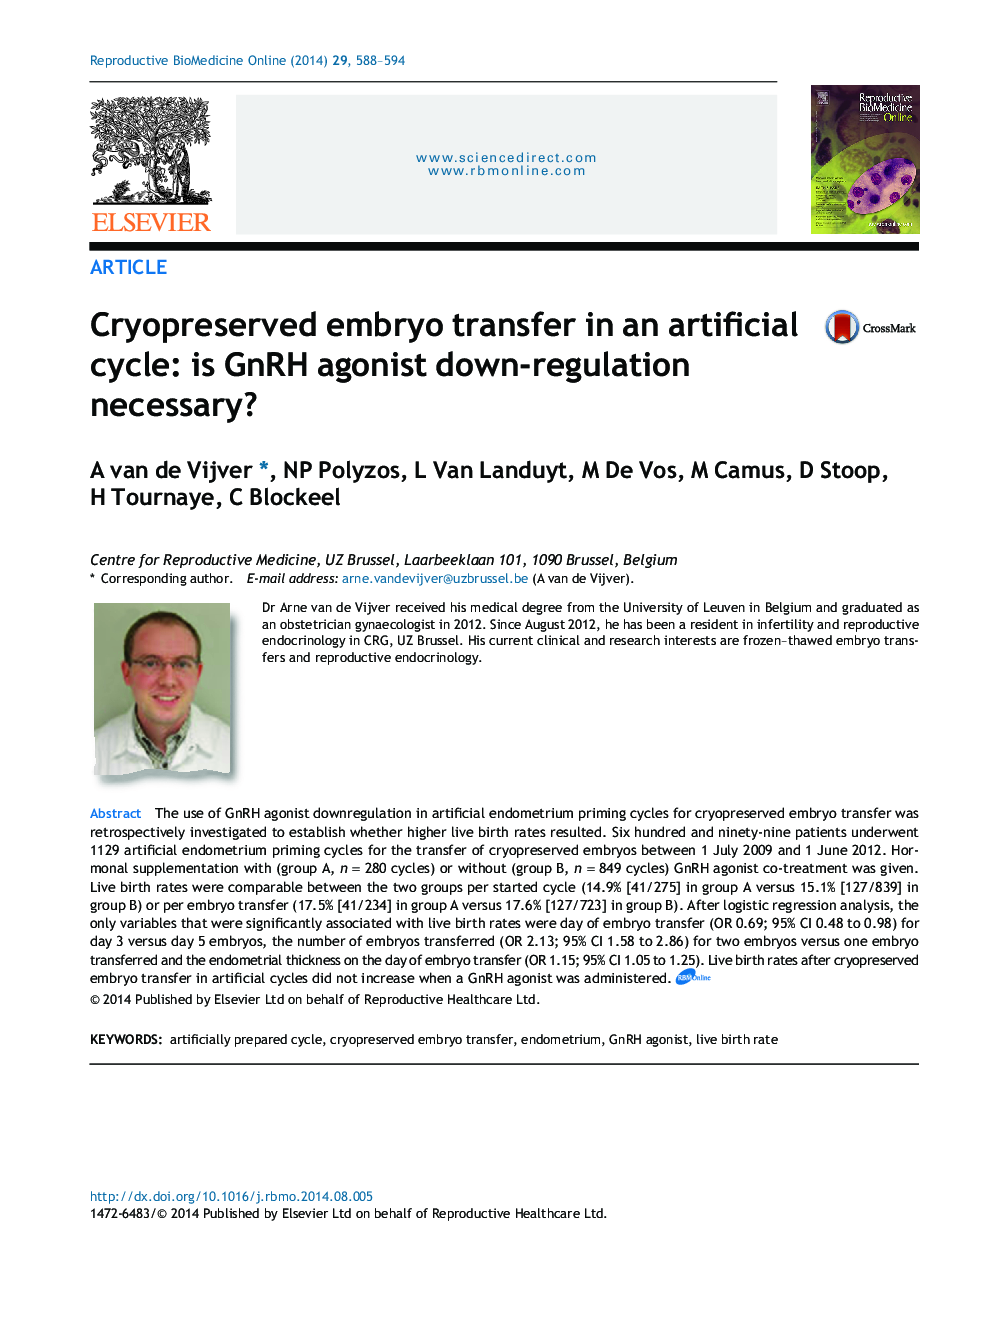 Cryopreserved embryo transfer in an artificial cycle: is GnRH agonist down-regulation necessary?